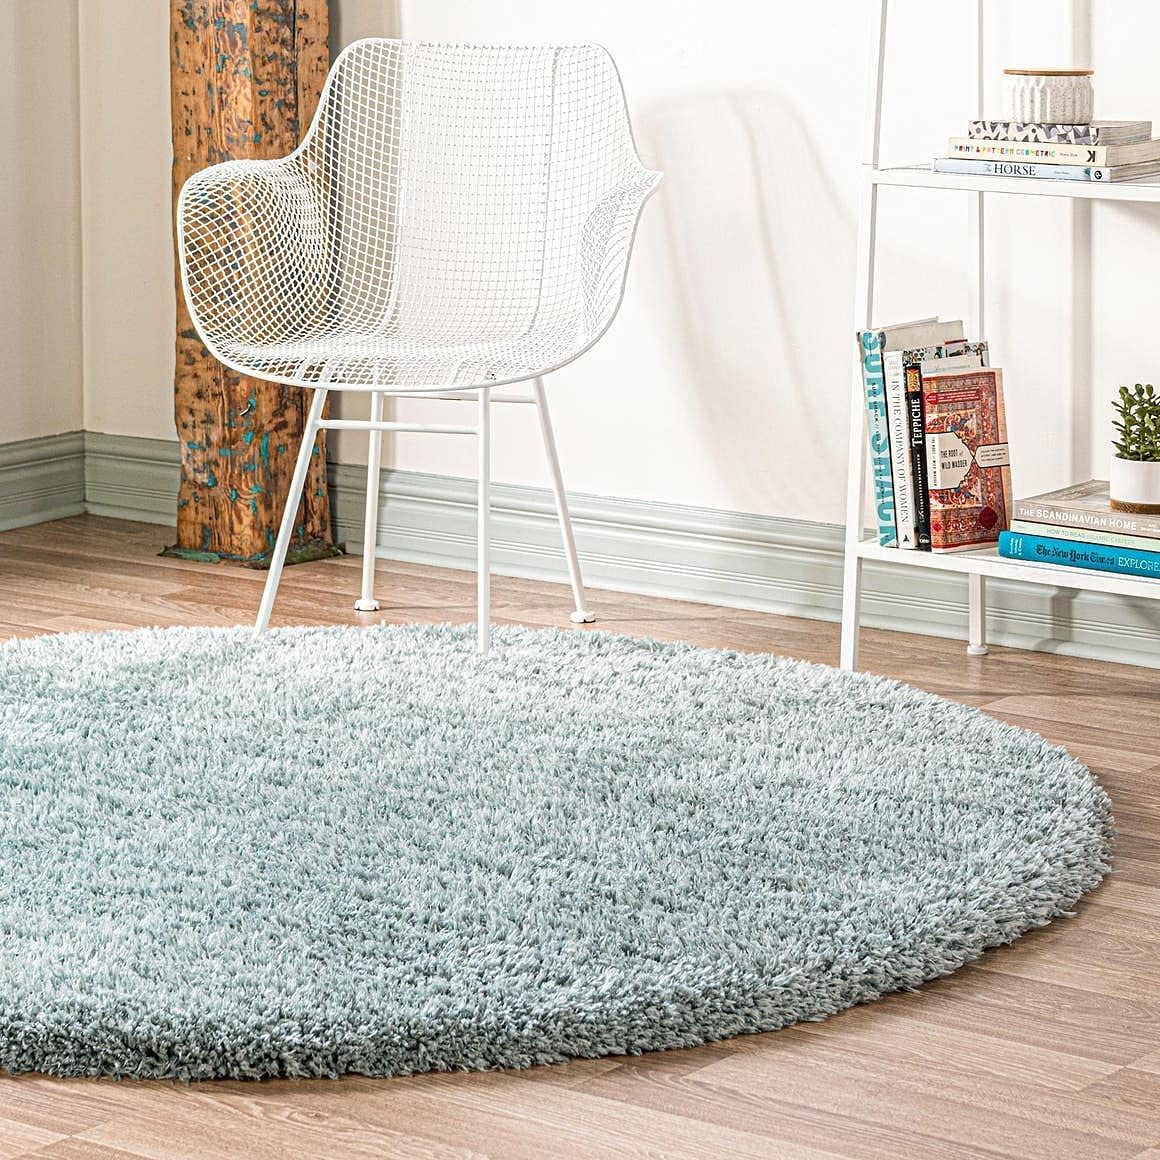 Rugs Infinity Collection Solid Shag Area Rug 8 | Ubuy India In Solid Shag Round Rugs (View 12 of 15)